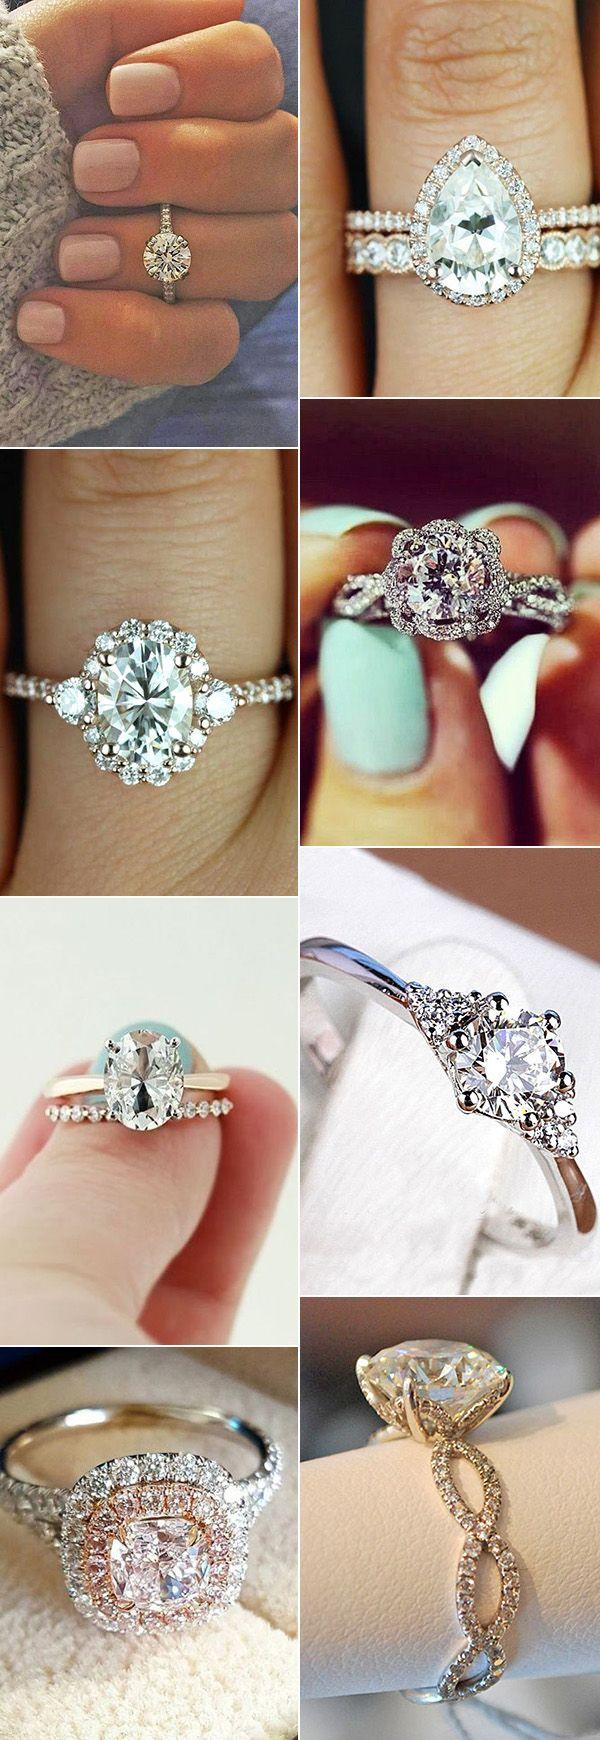 Wedding - 20 Amazing Wedding Engagement Rings For 2017 Trends